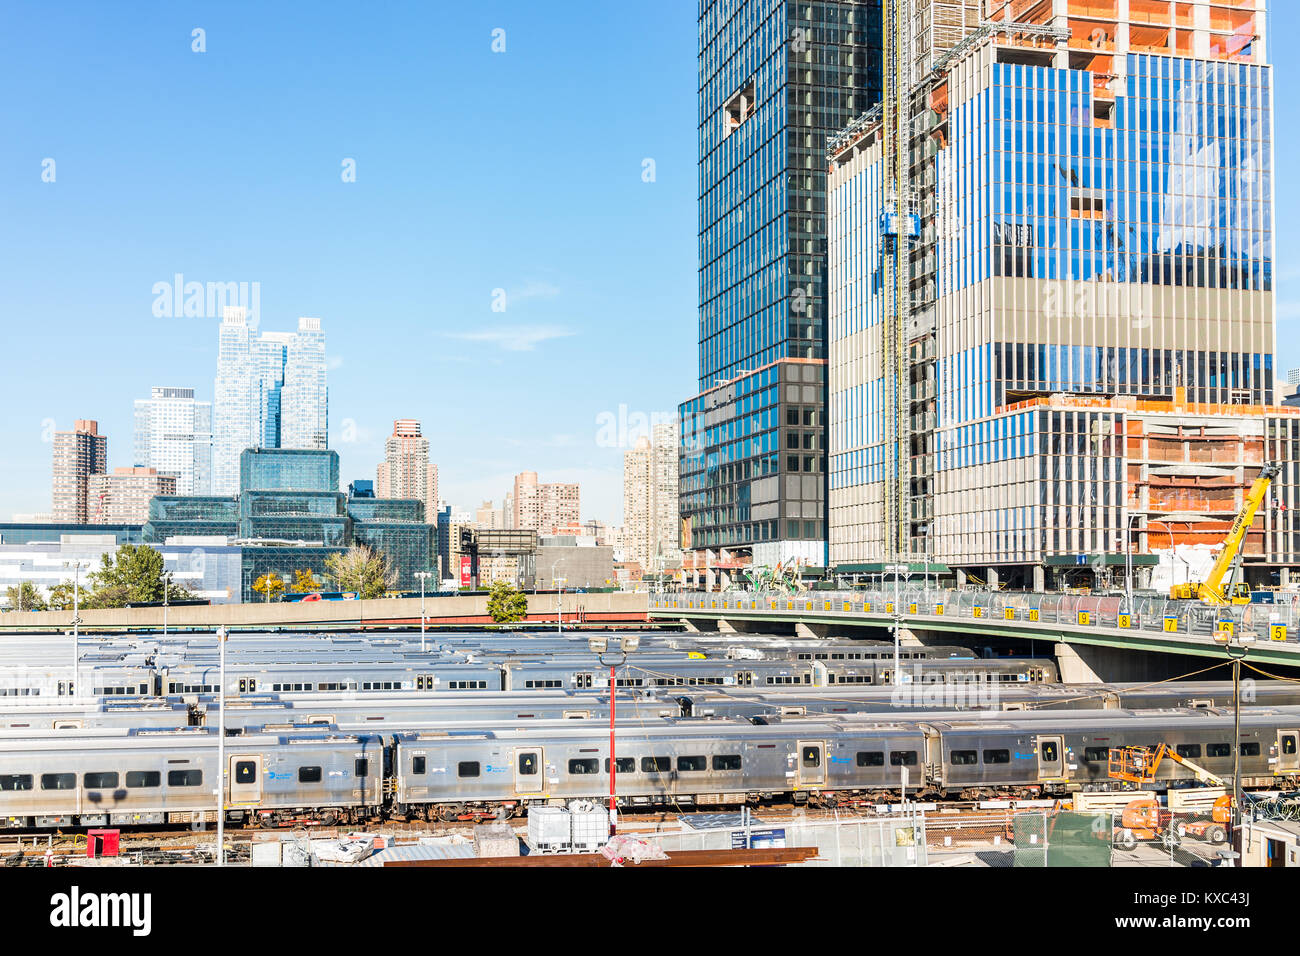 New York City, USA - October 27, 2017: View of the Hudson Yards train depot and building development from the High Line, an elevated urban park in NYC Stock Photo